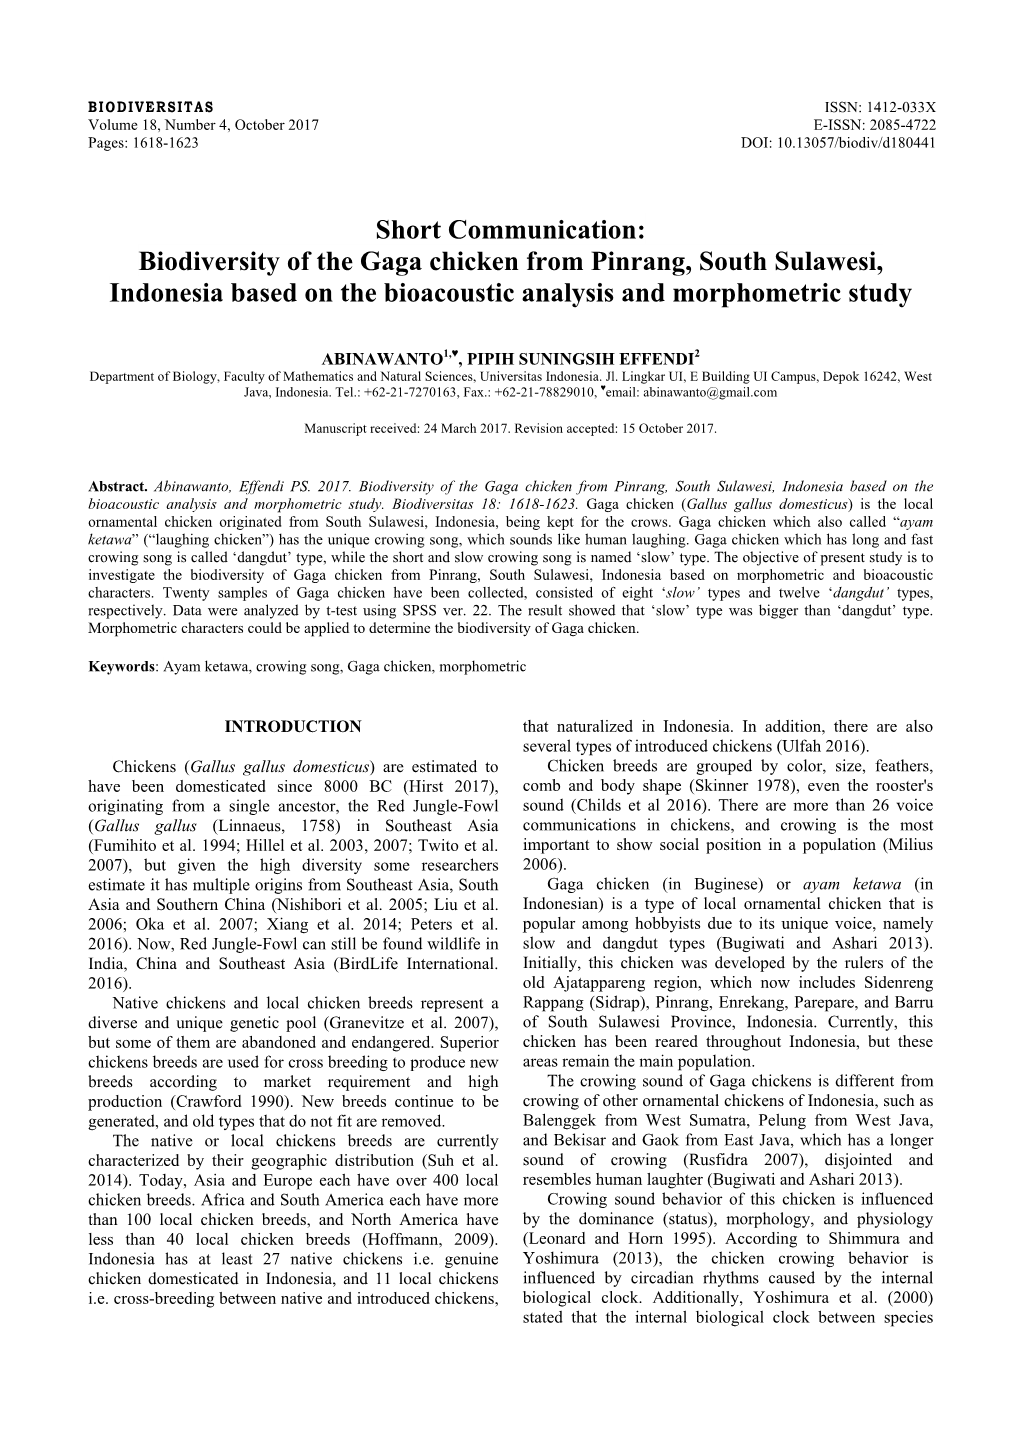 Biodiversity of the Gaga Chicken from Pinrang, South Sulawesi, Indonesia Based on the Bioacoustic Analysis and Morphometric Study